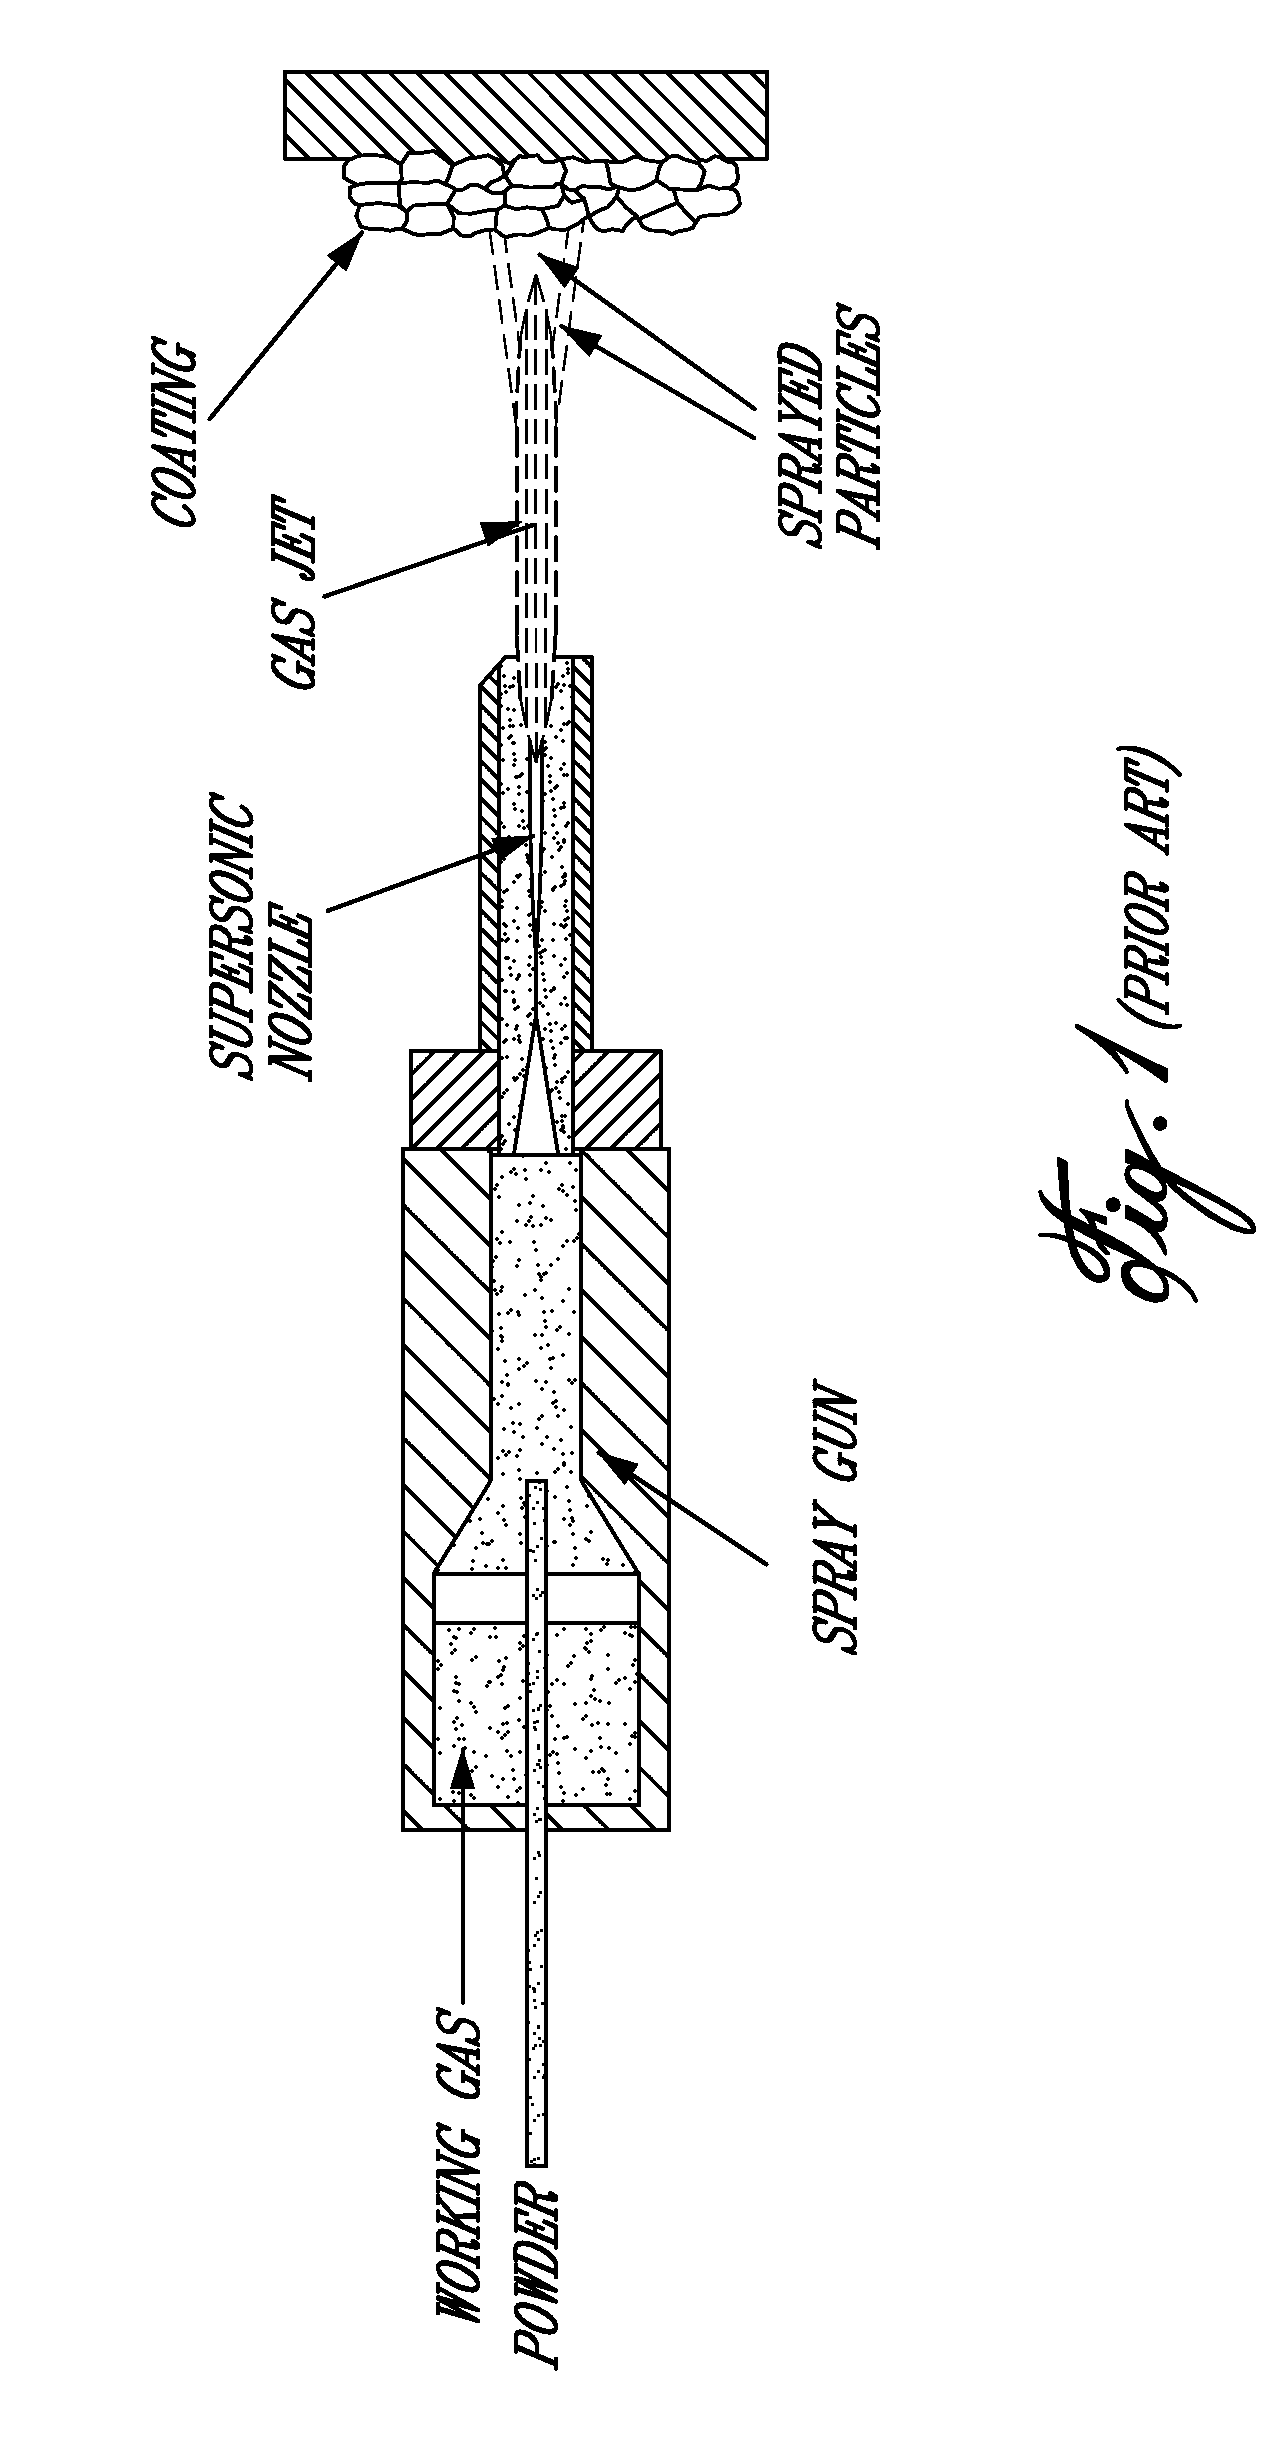 Method and system for producing electrocatalytic coatings and electrodes